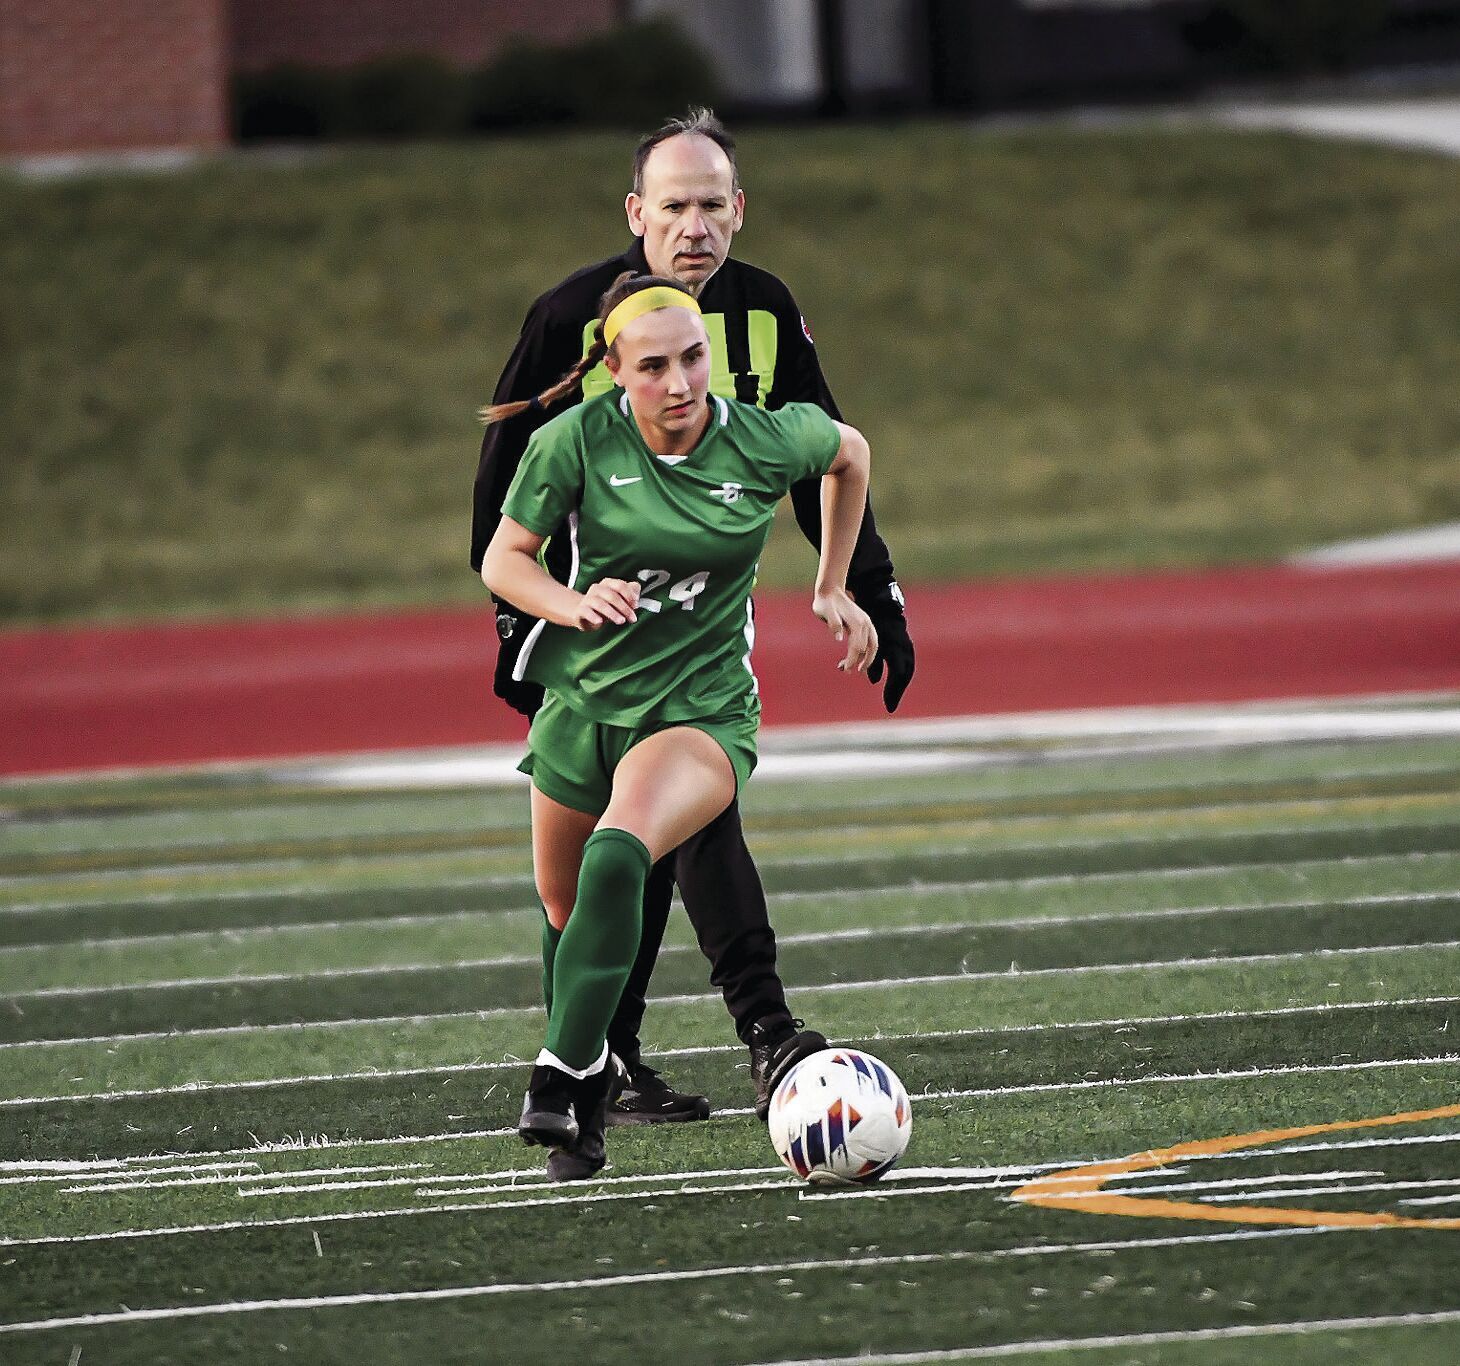 Smithville girls soccer looking to build wins